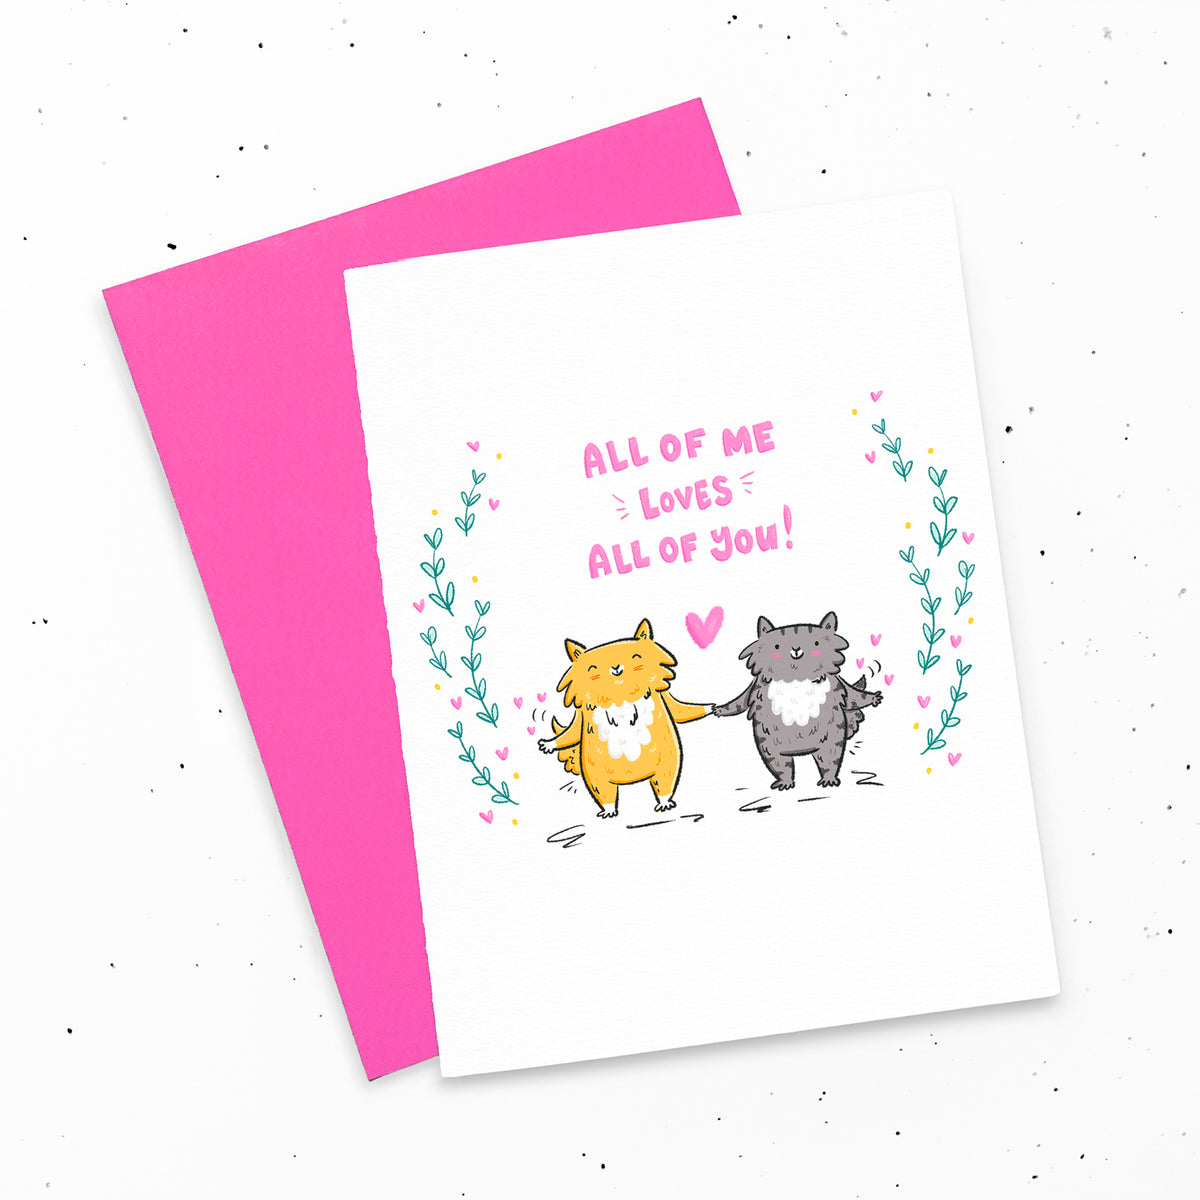 All of me loves all of you! That includes all of my farts and all of your farts! ~ Very romantic greeting card my My Cat Is People.